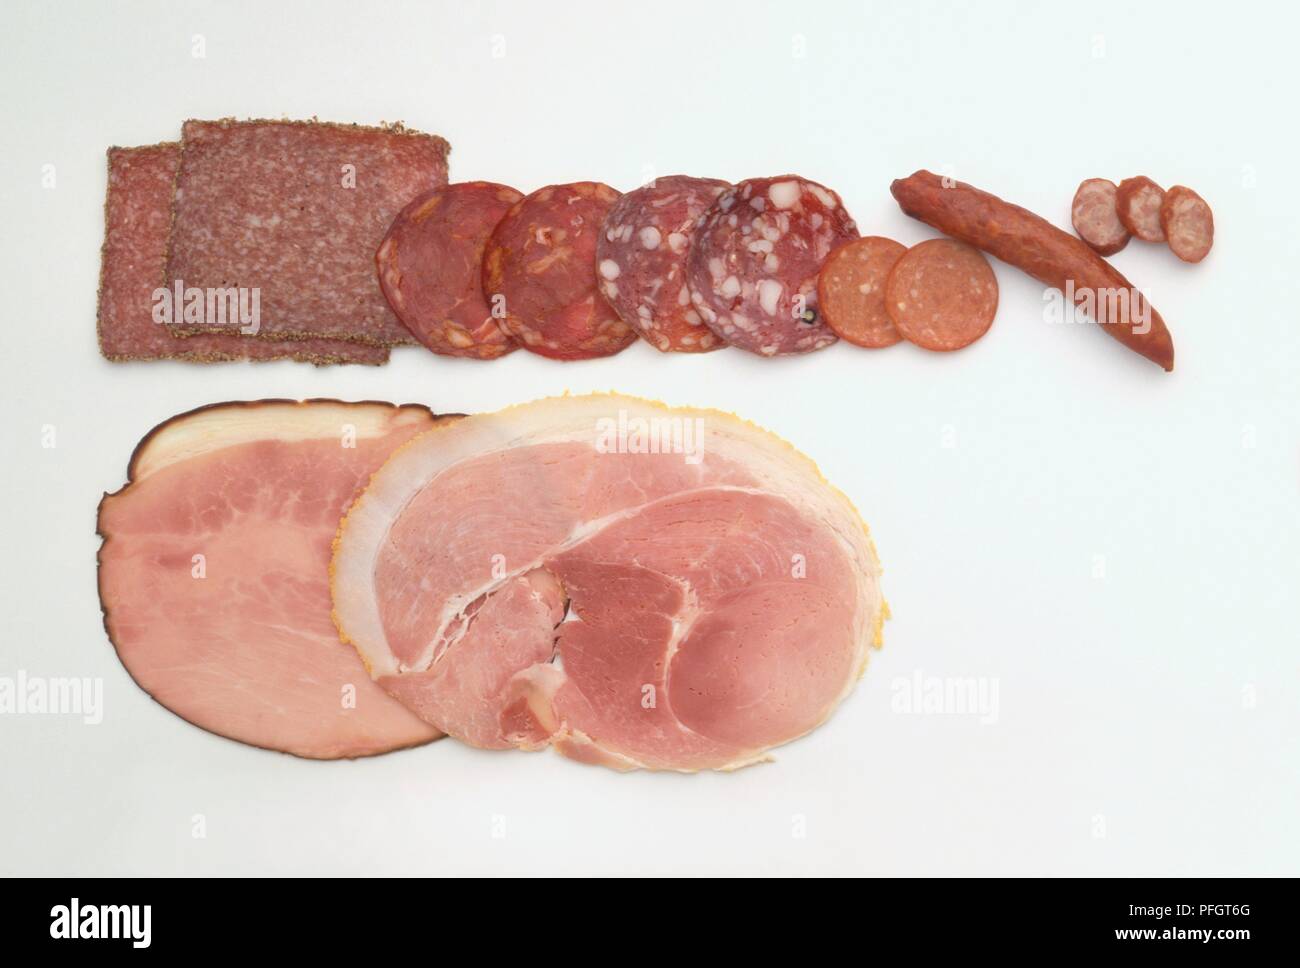 Slices of cooked ham, and different types of salami and cured ...